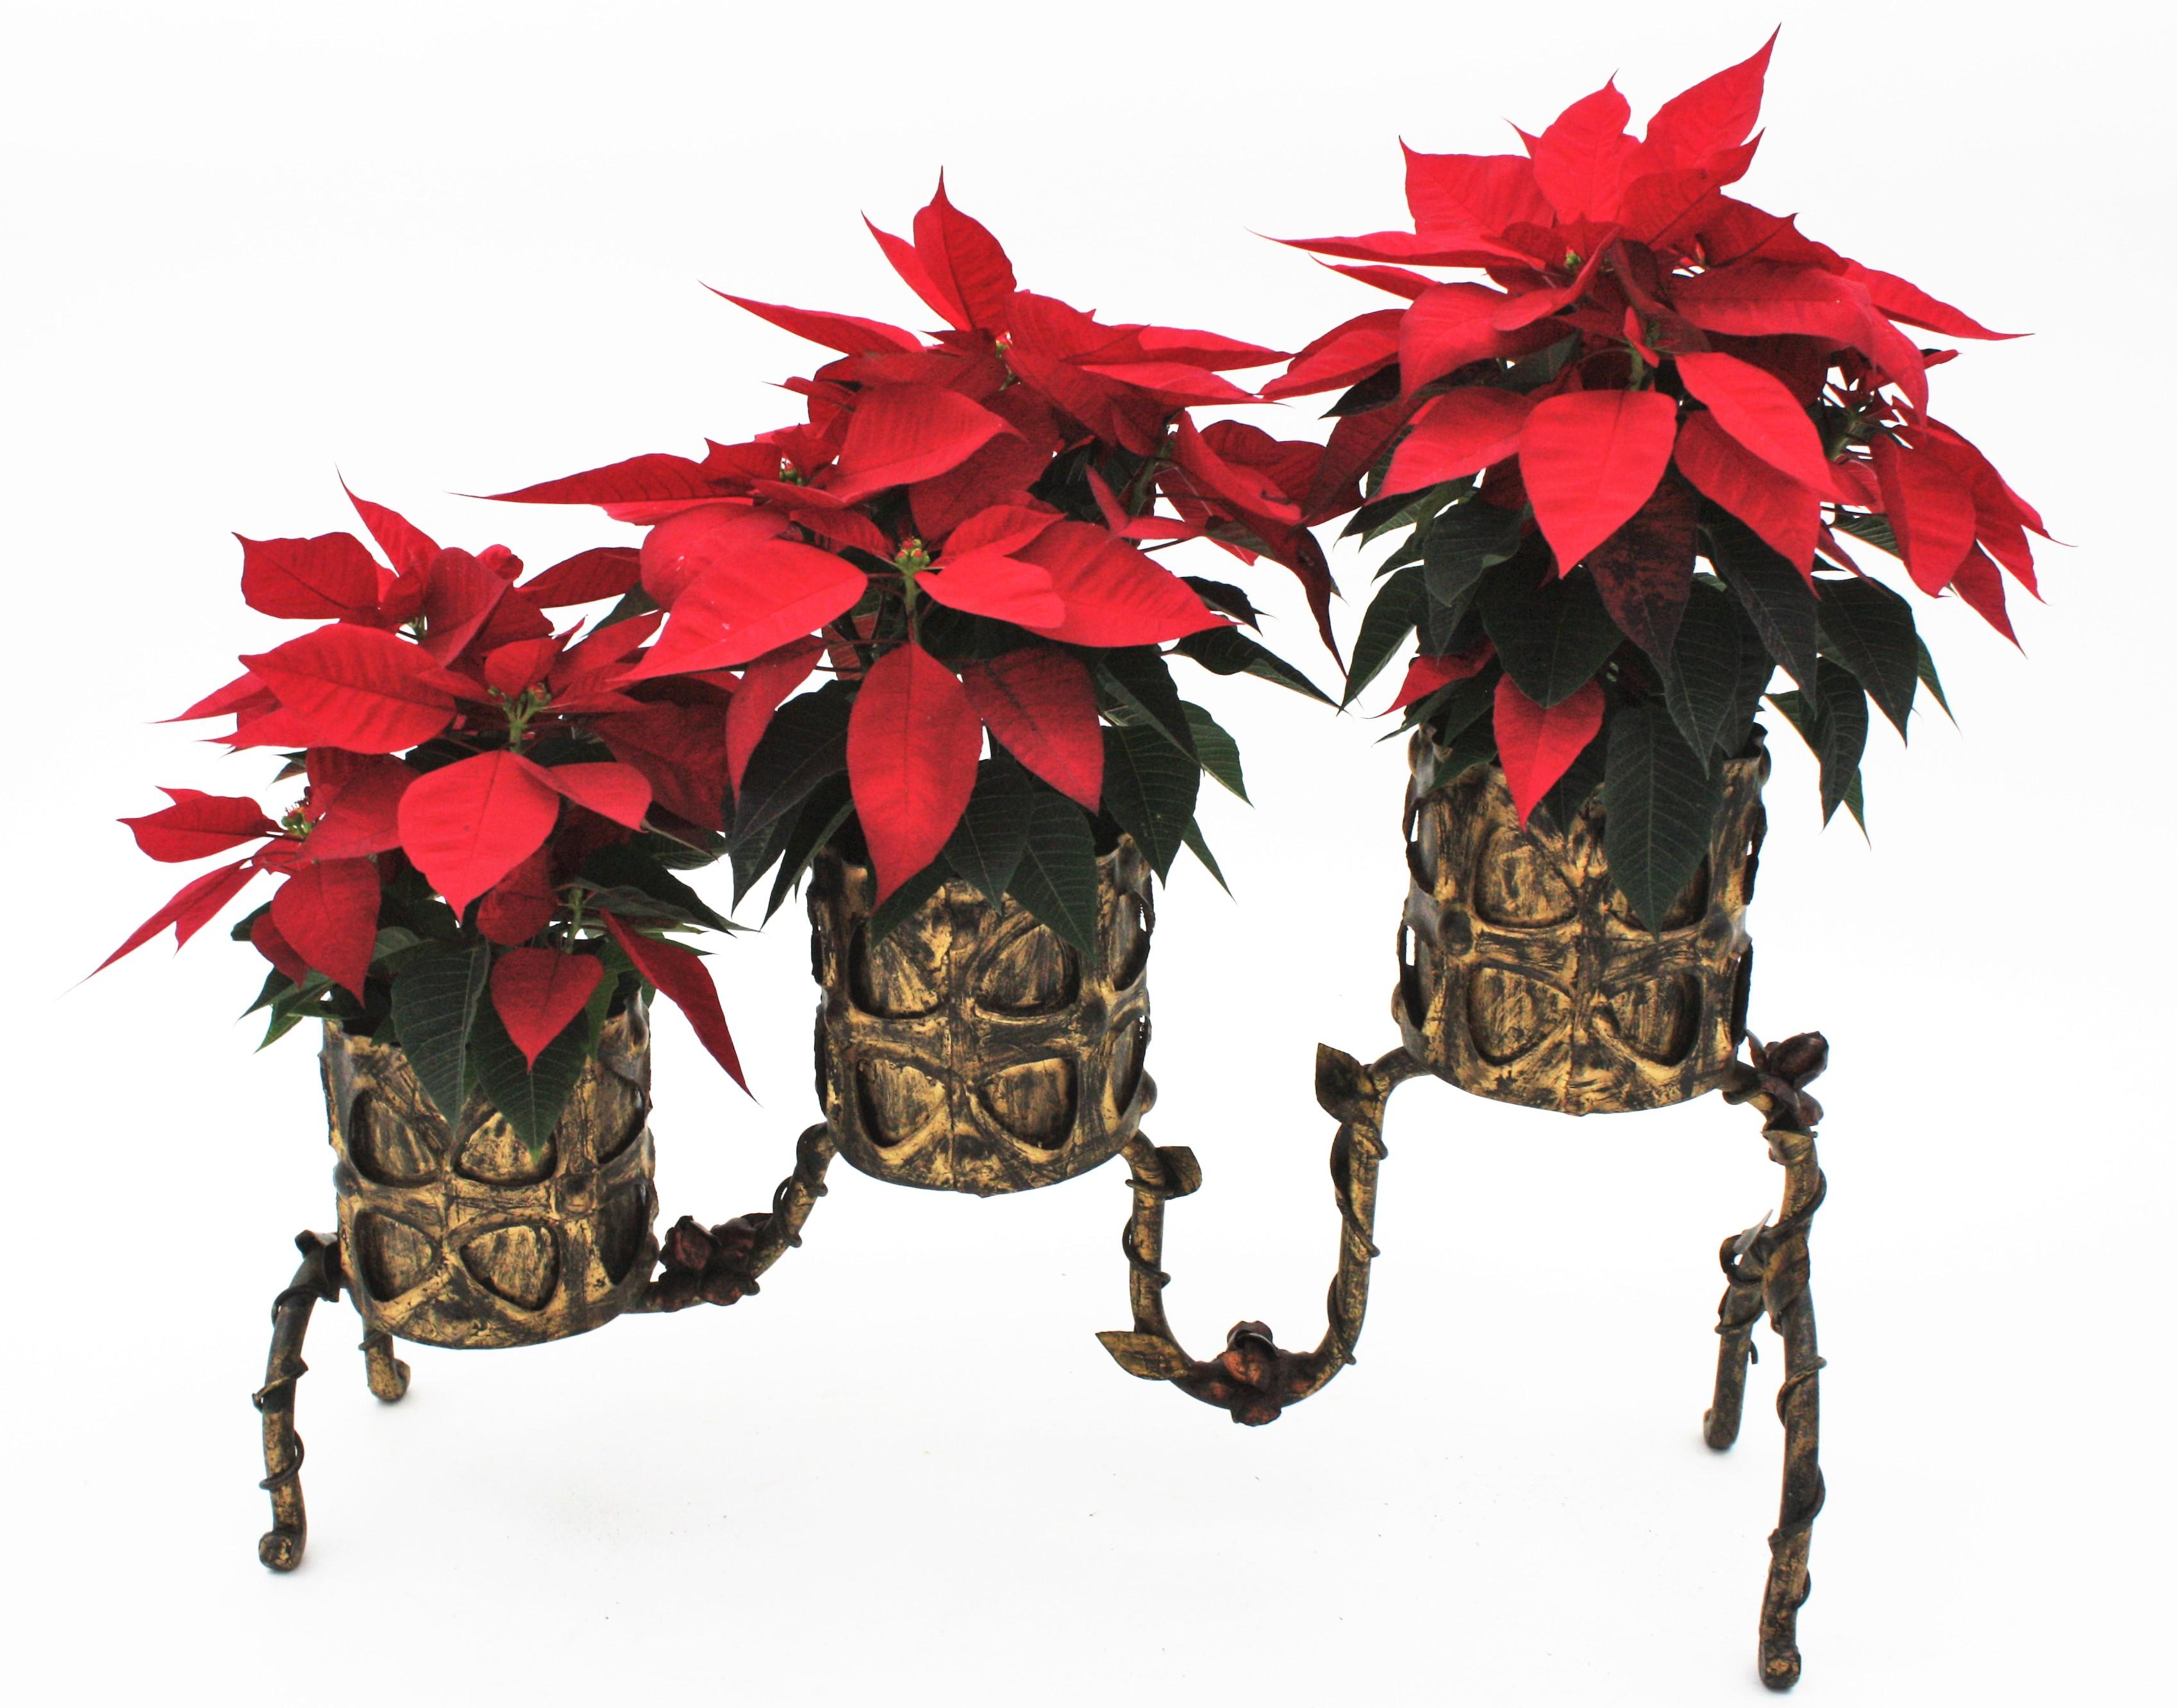 Mid-Century Modern Spanish Gilt Iron Planter / Three Plant Stand with Foliage Floral Motifs, 1950s For Sale